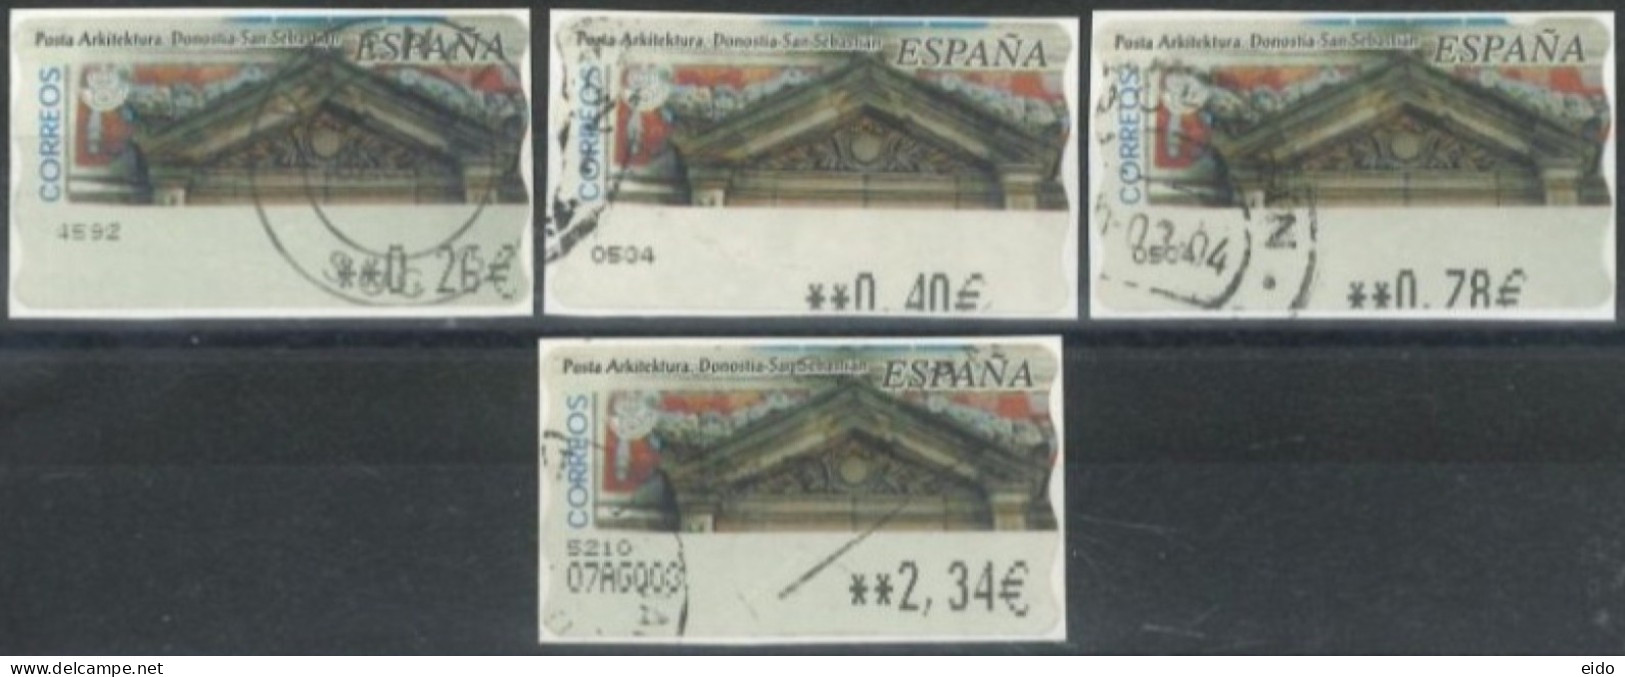 SPAIN- 2004, SAN SABASTIAN ARCHITECTURE STAMPS LABELS SET OF 4, DIFFERENT VALUES, USED. - Gebraucht